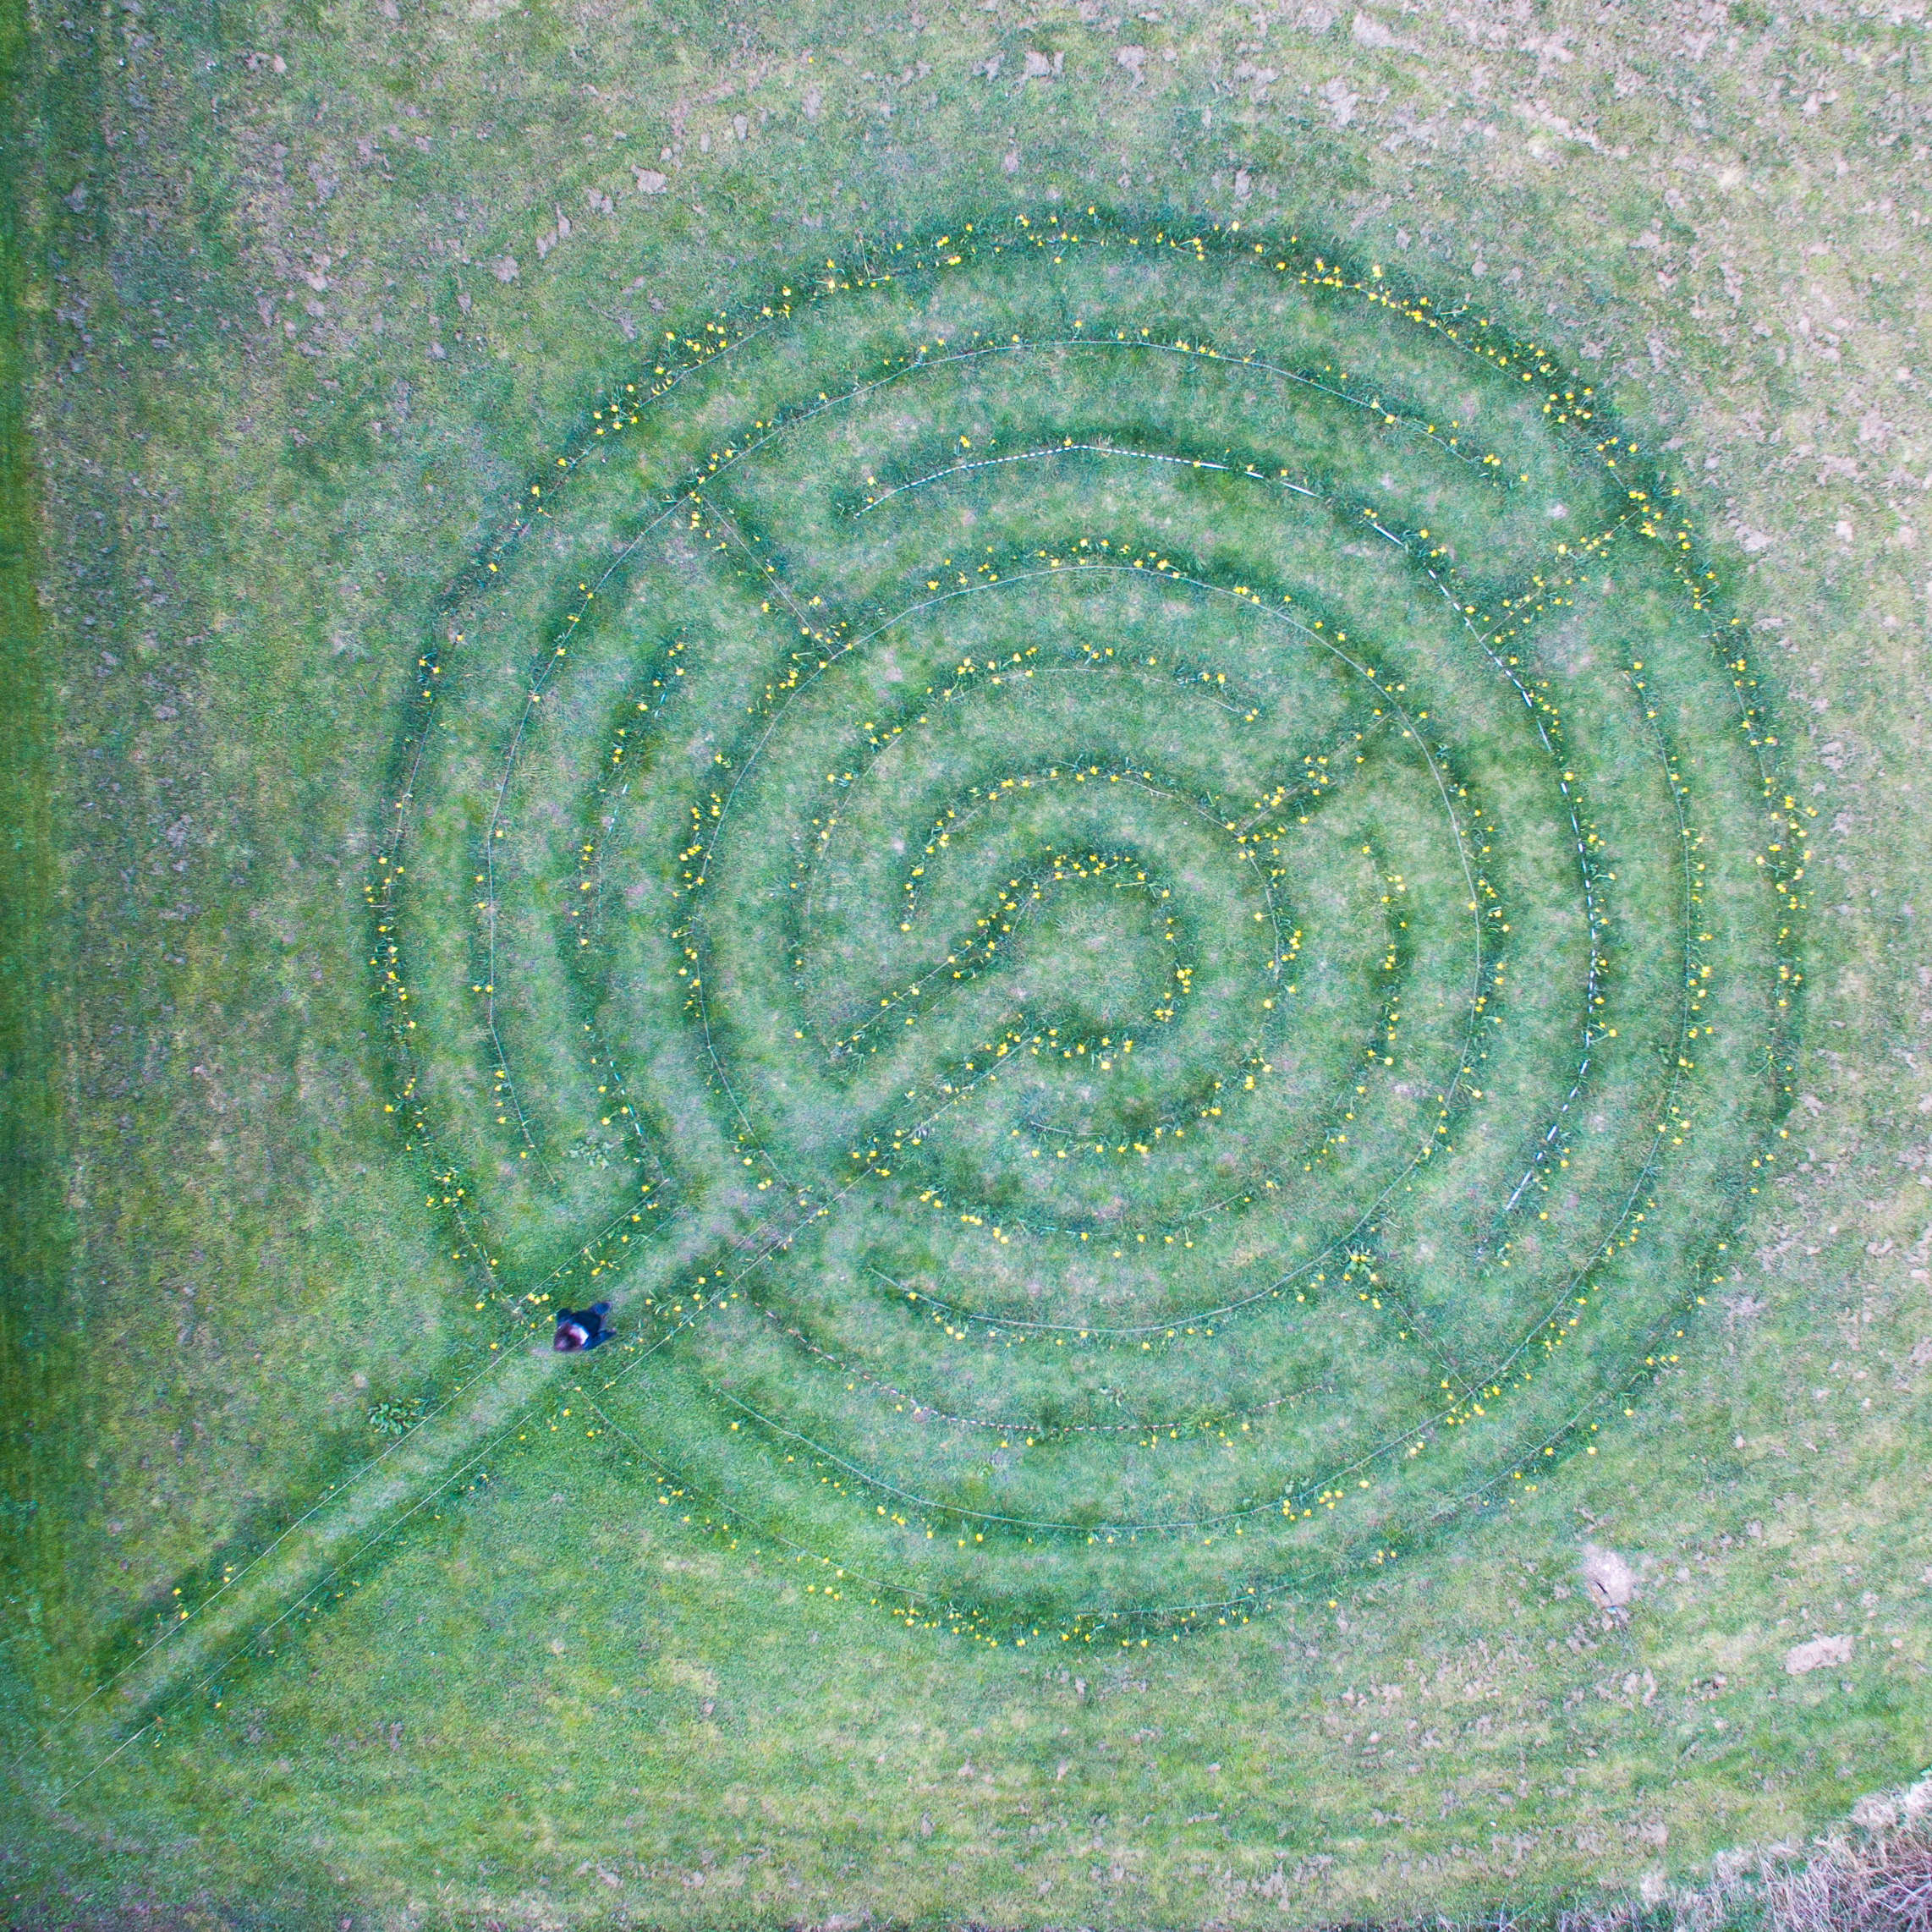 The daffodil labyrinth. Picture: Sam Herbert, Camel Valley Creative